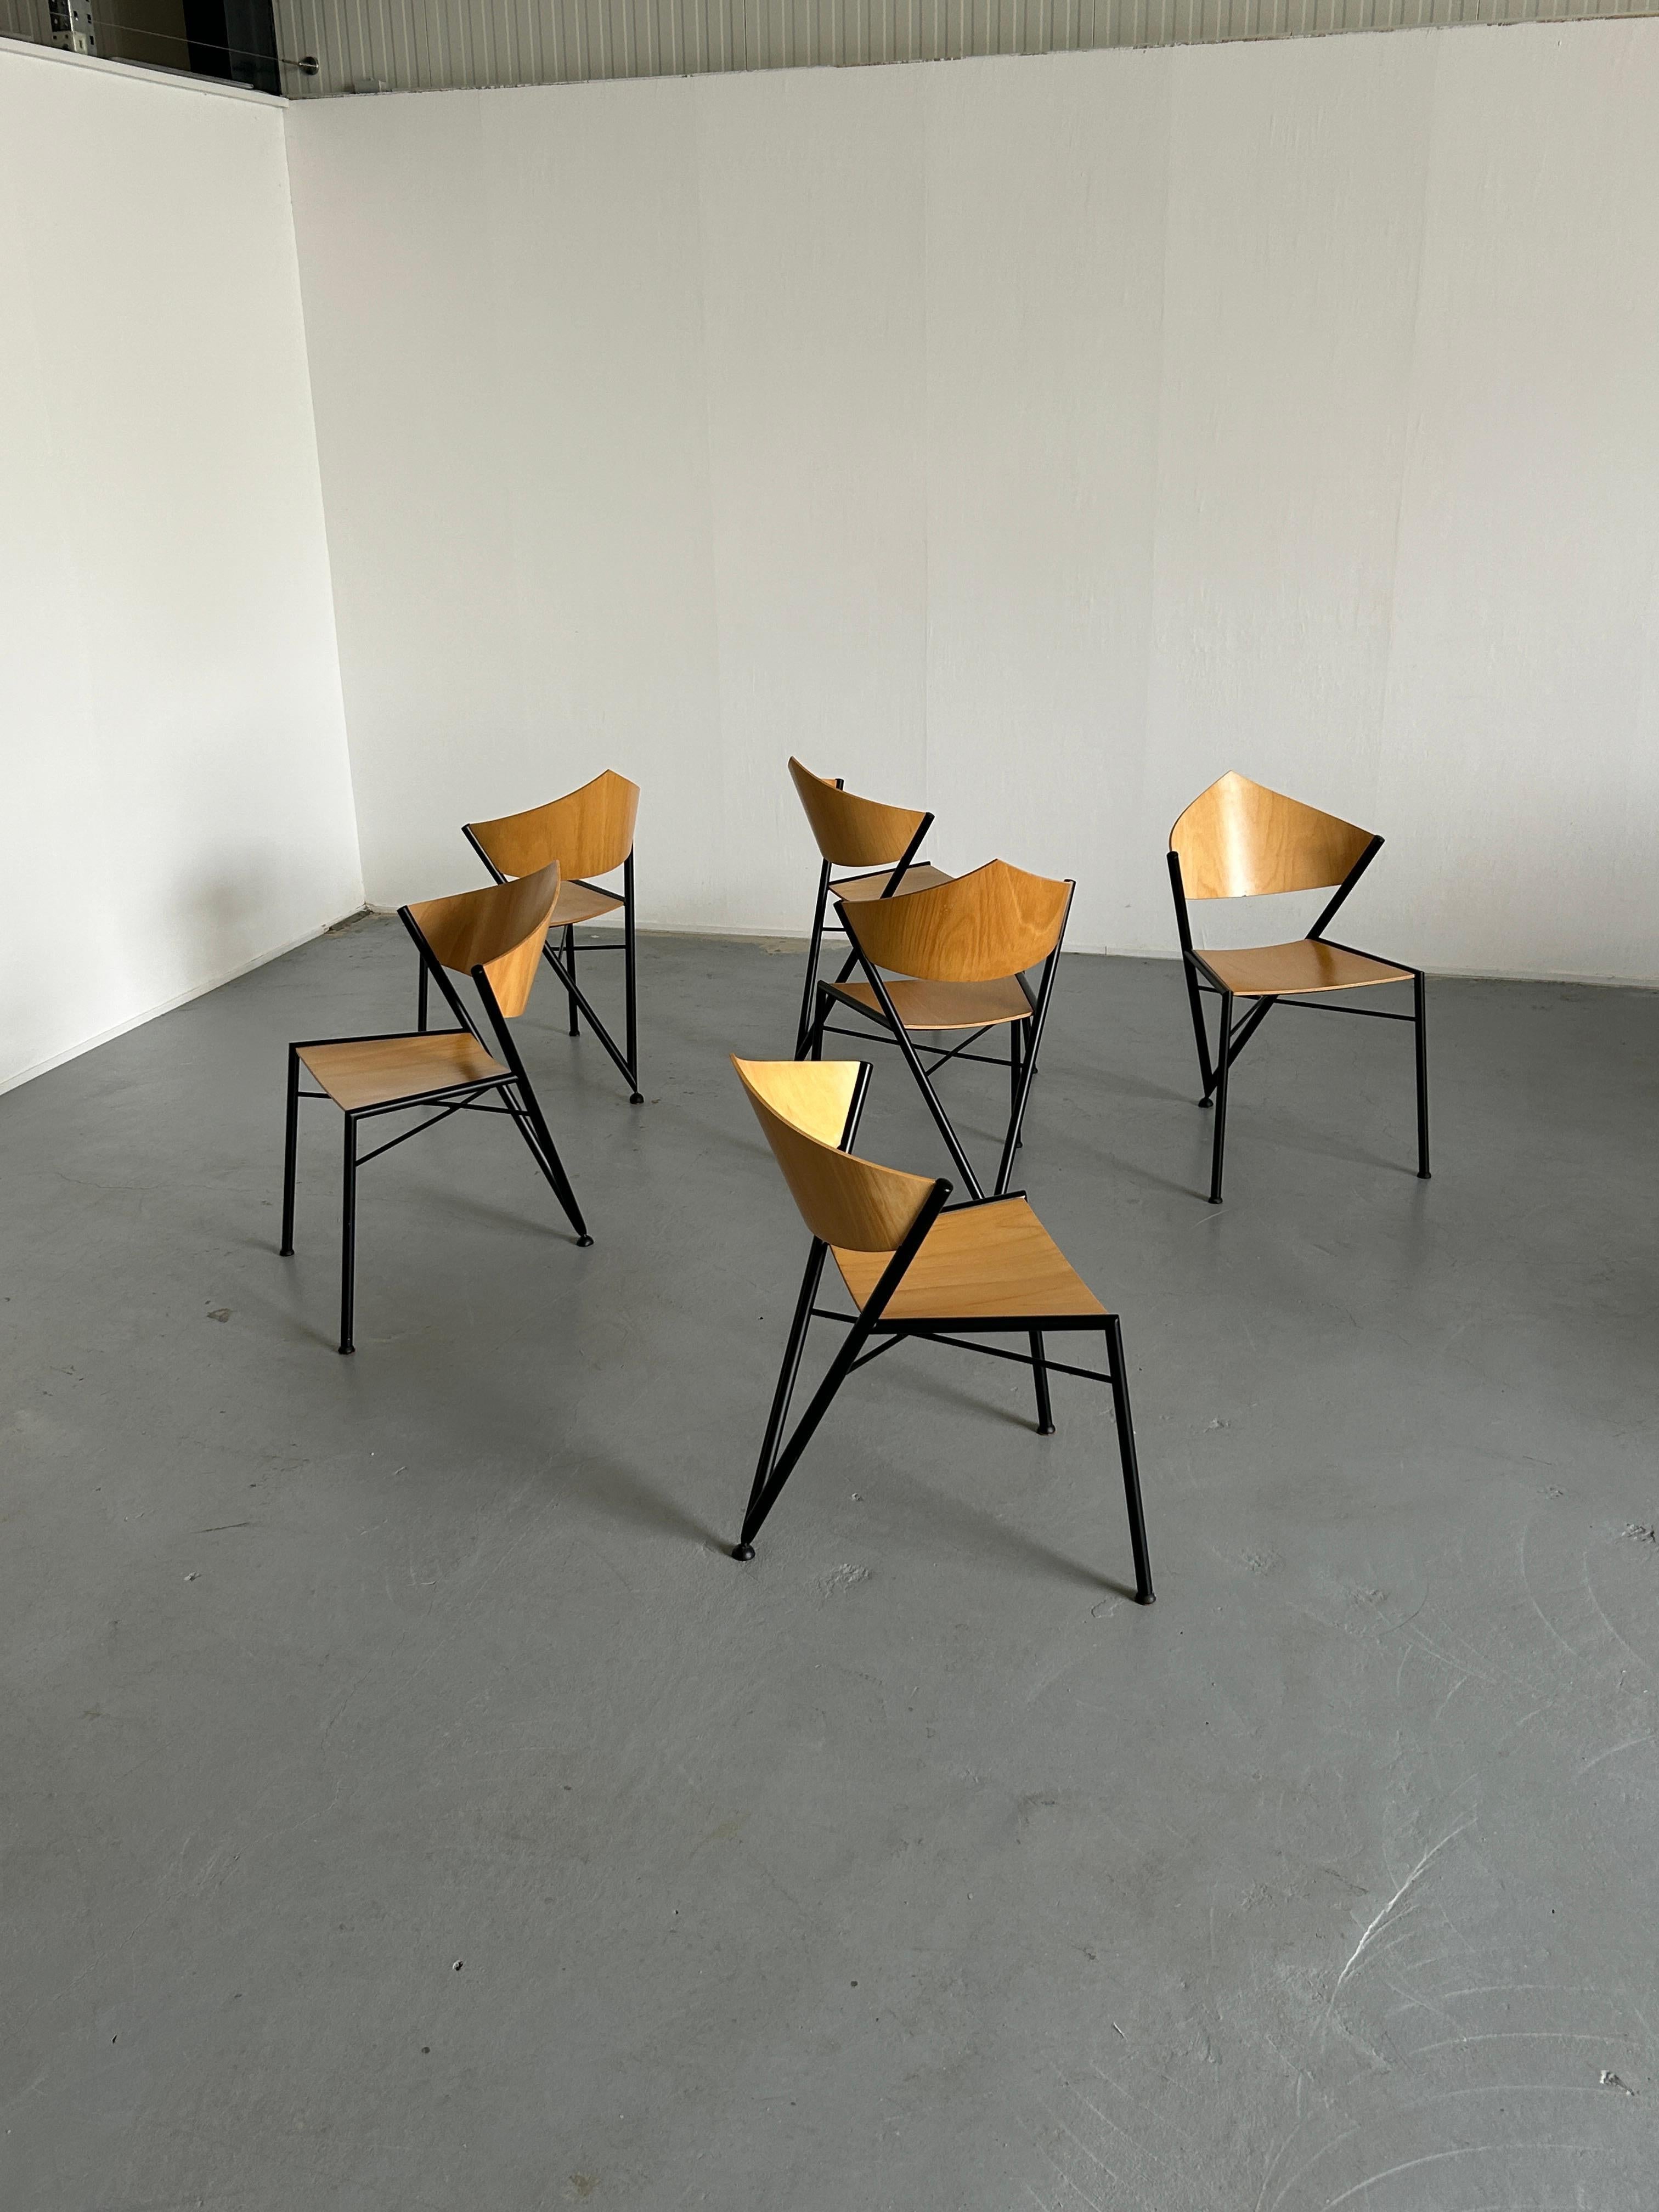 Post-Modern 1 of 6 Postmodern Metal Framed Plywood Chairs, Memphis Design, 1980s Italy